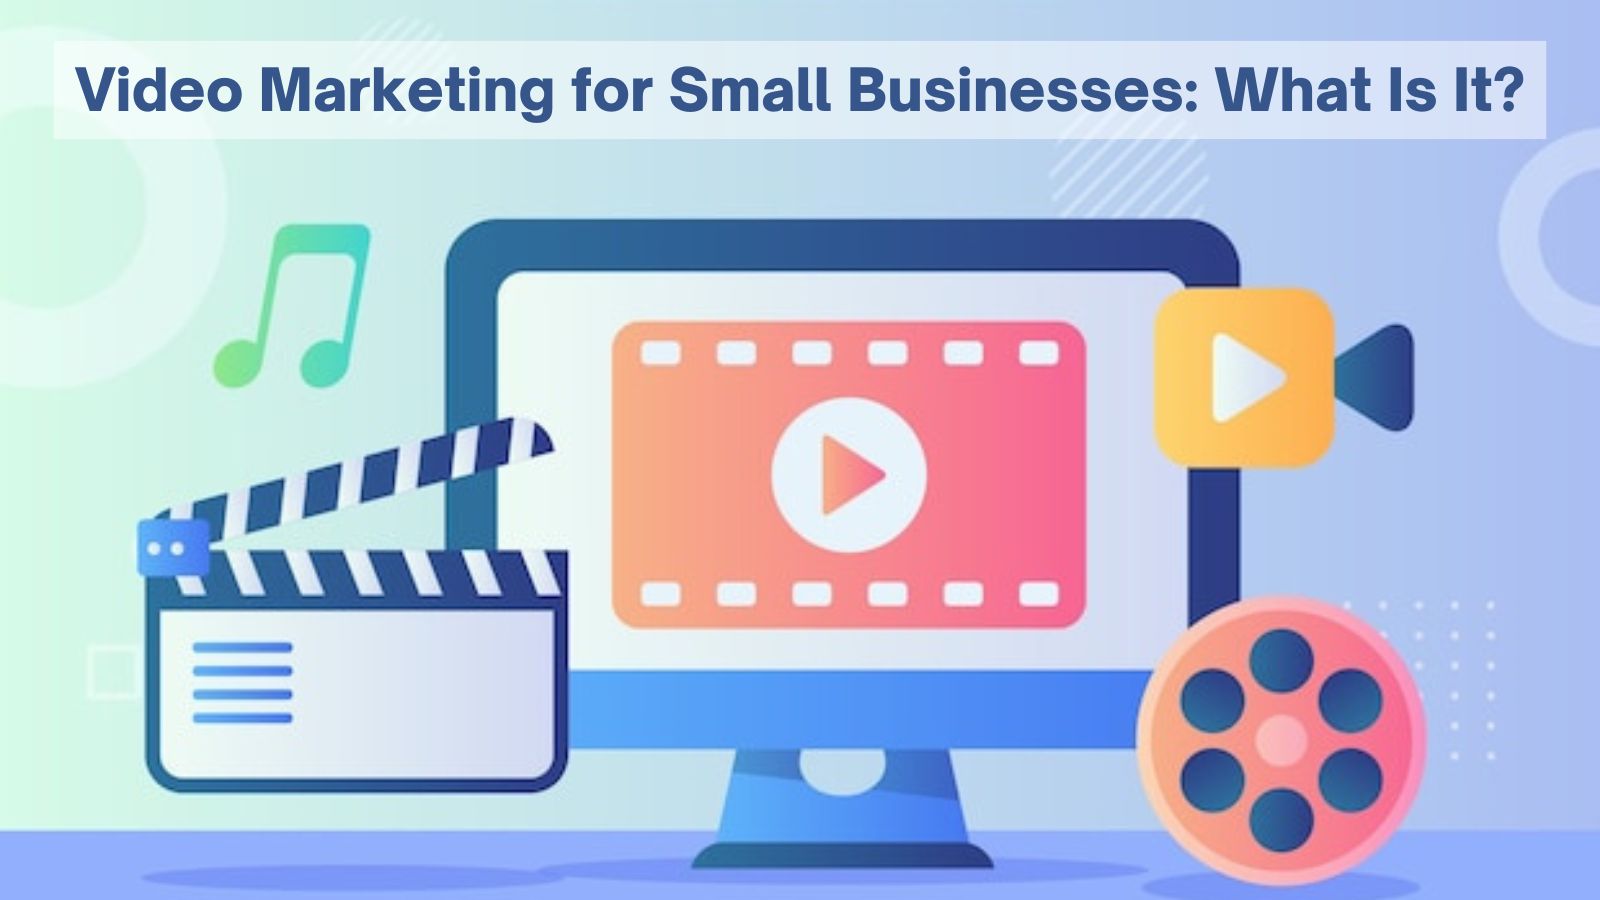 Video Marketing for Small Businesses: What Is It?